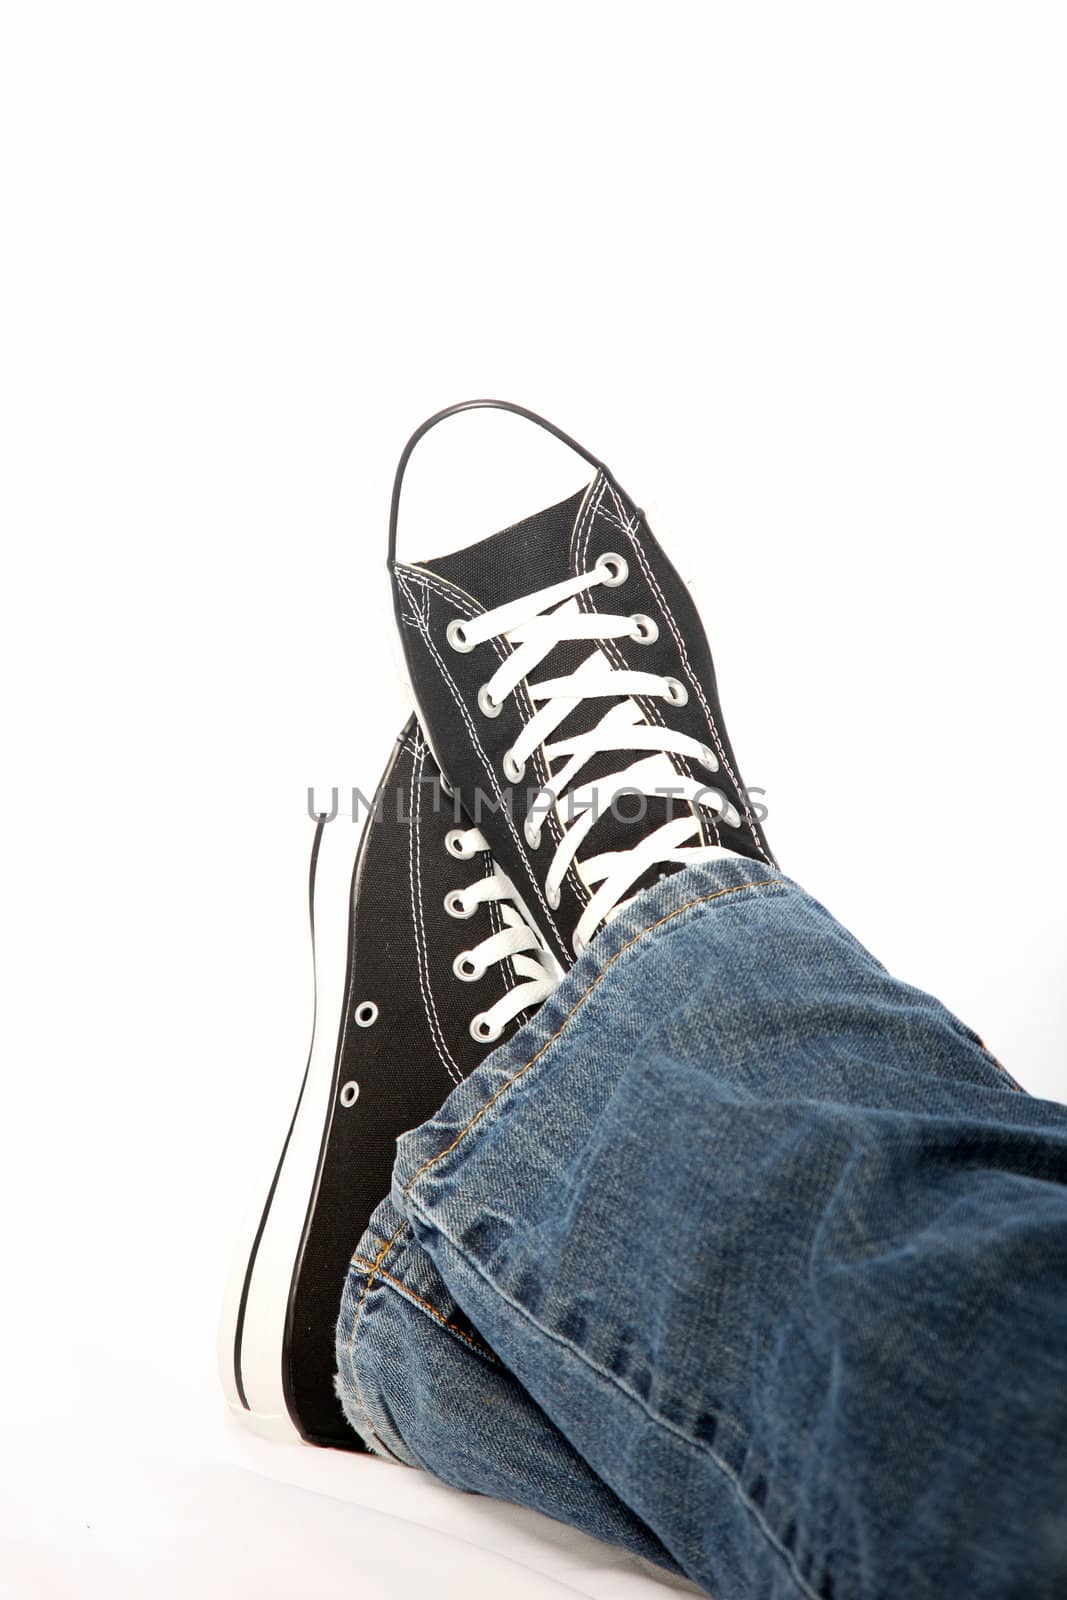 Cropped view of the feet of a person wearing jeans and sneakers isolated on white